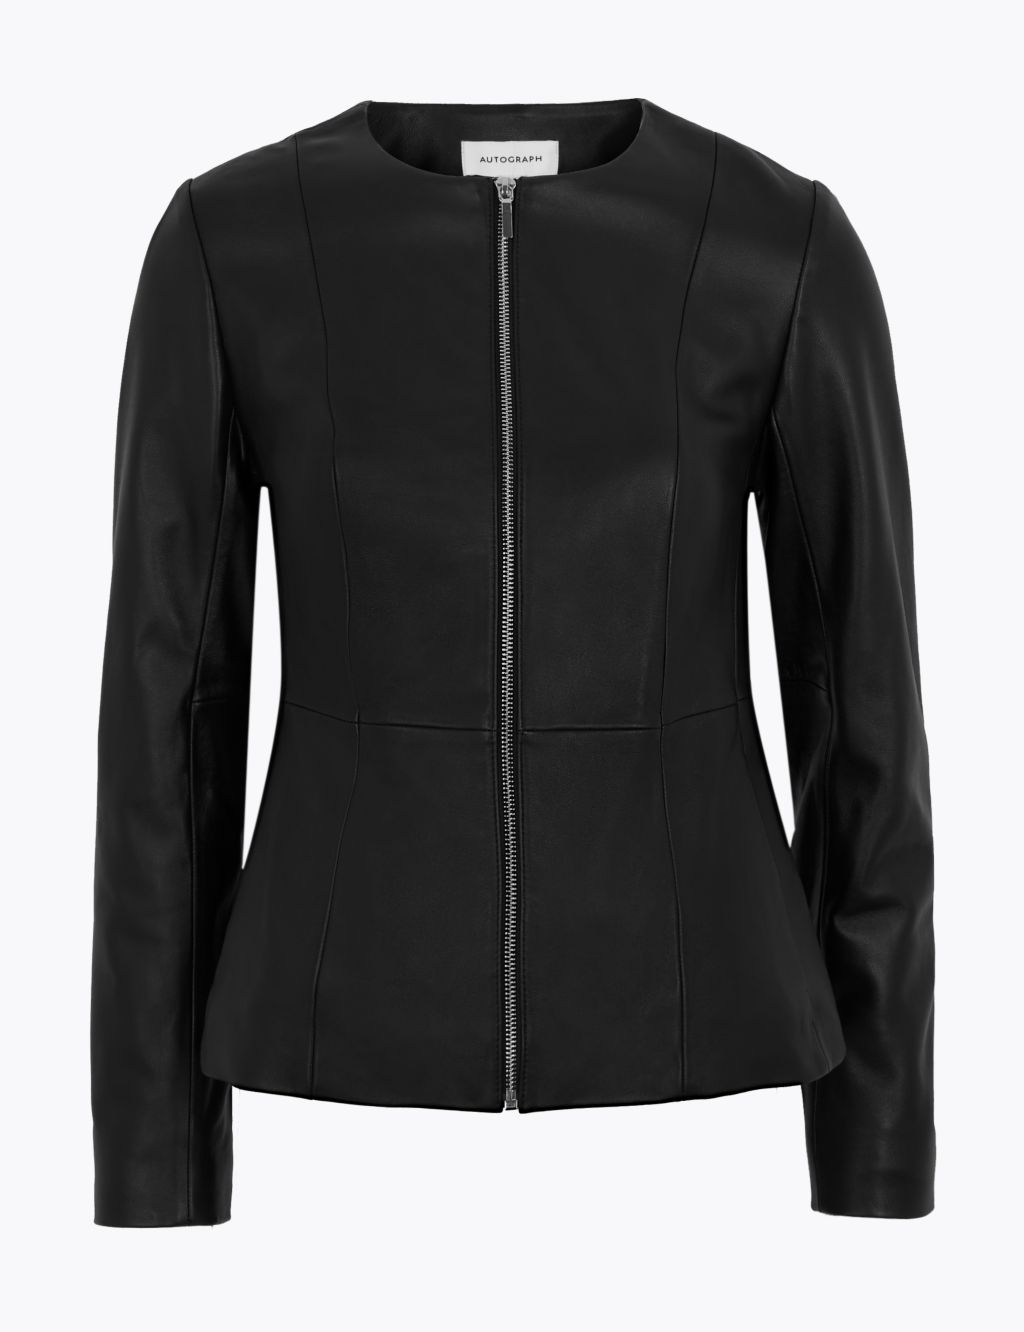 Page 7 - Women’s Coats & Jackets | M&S